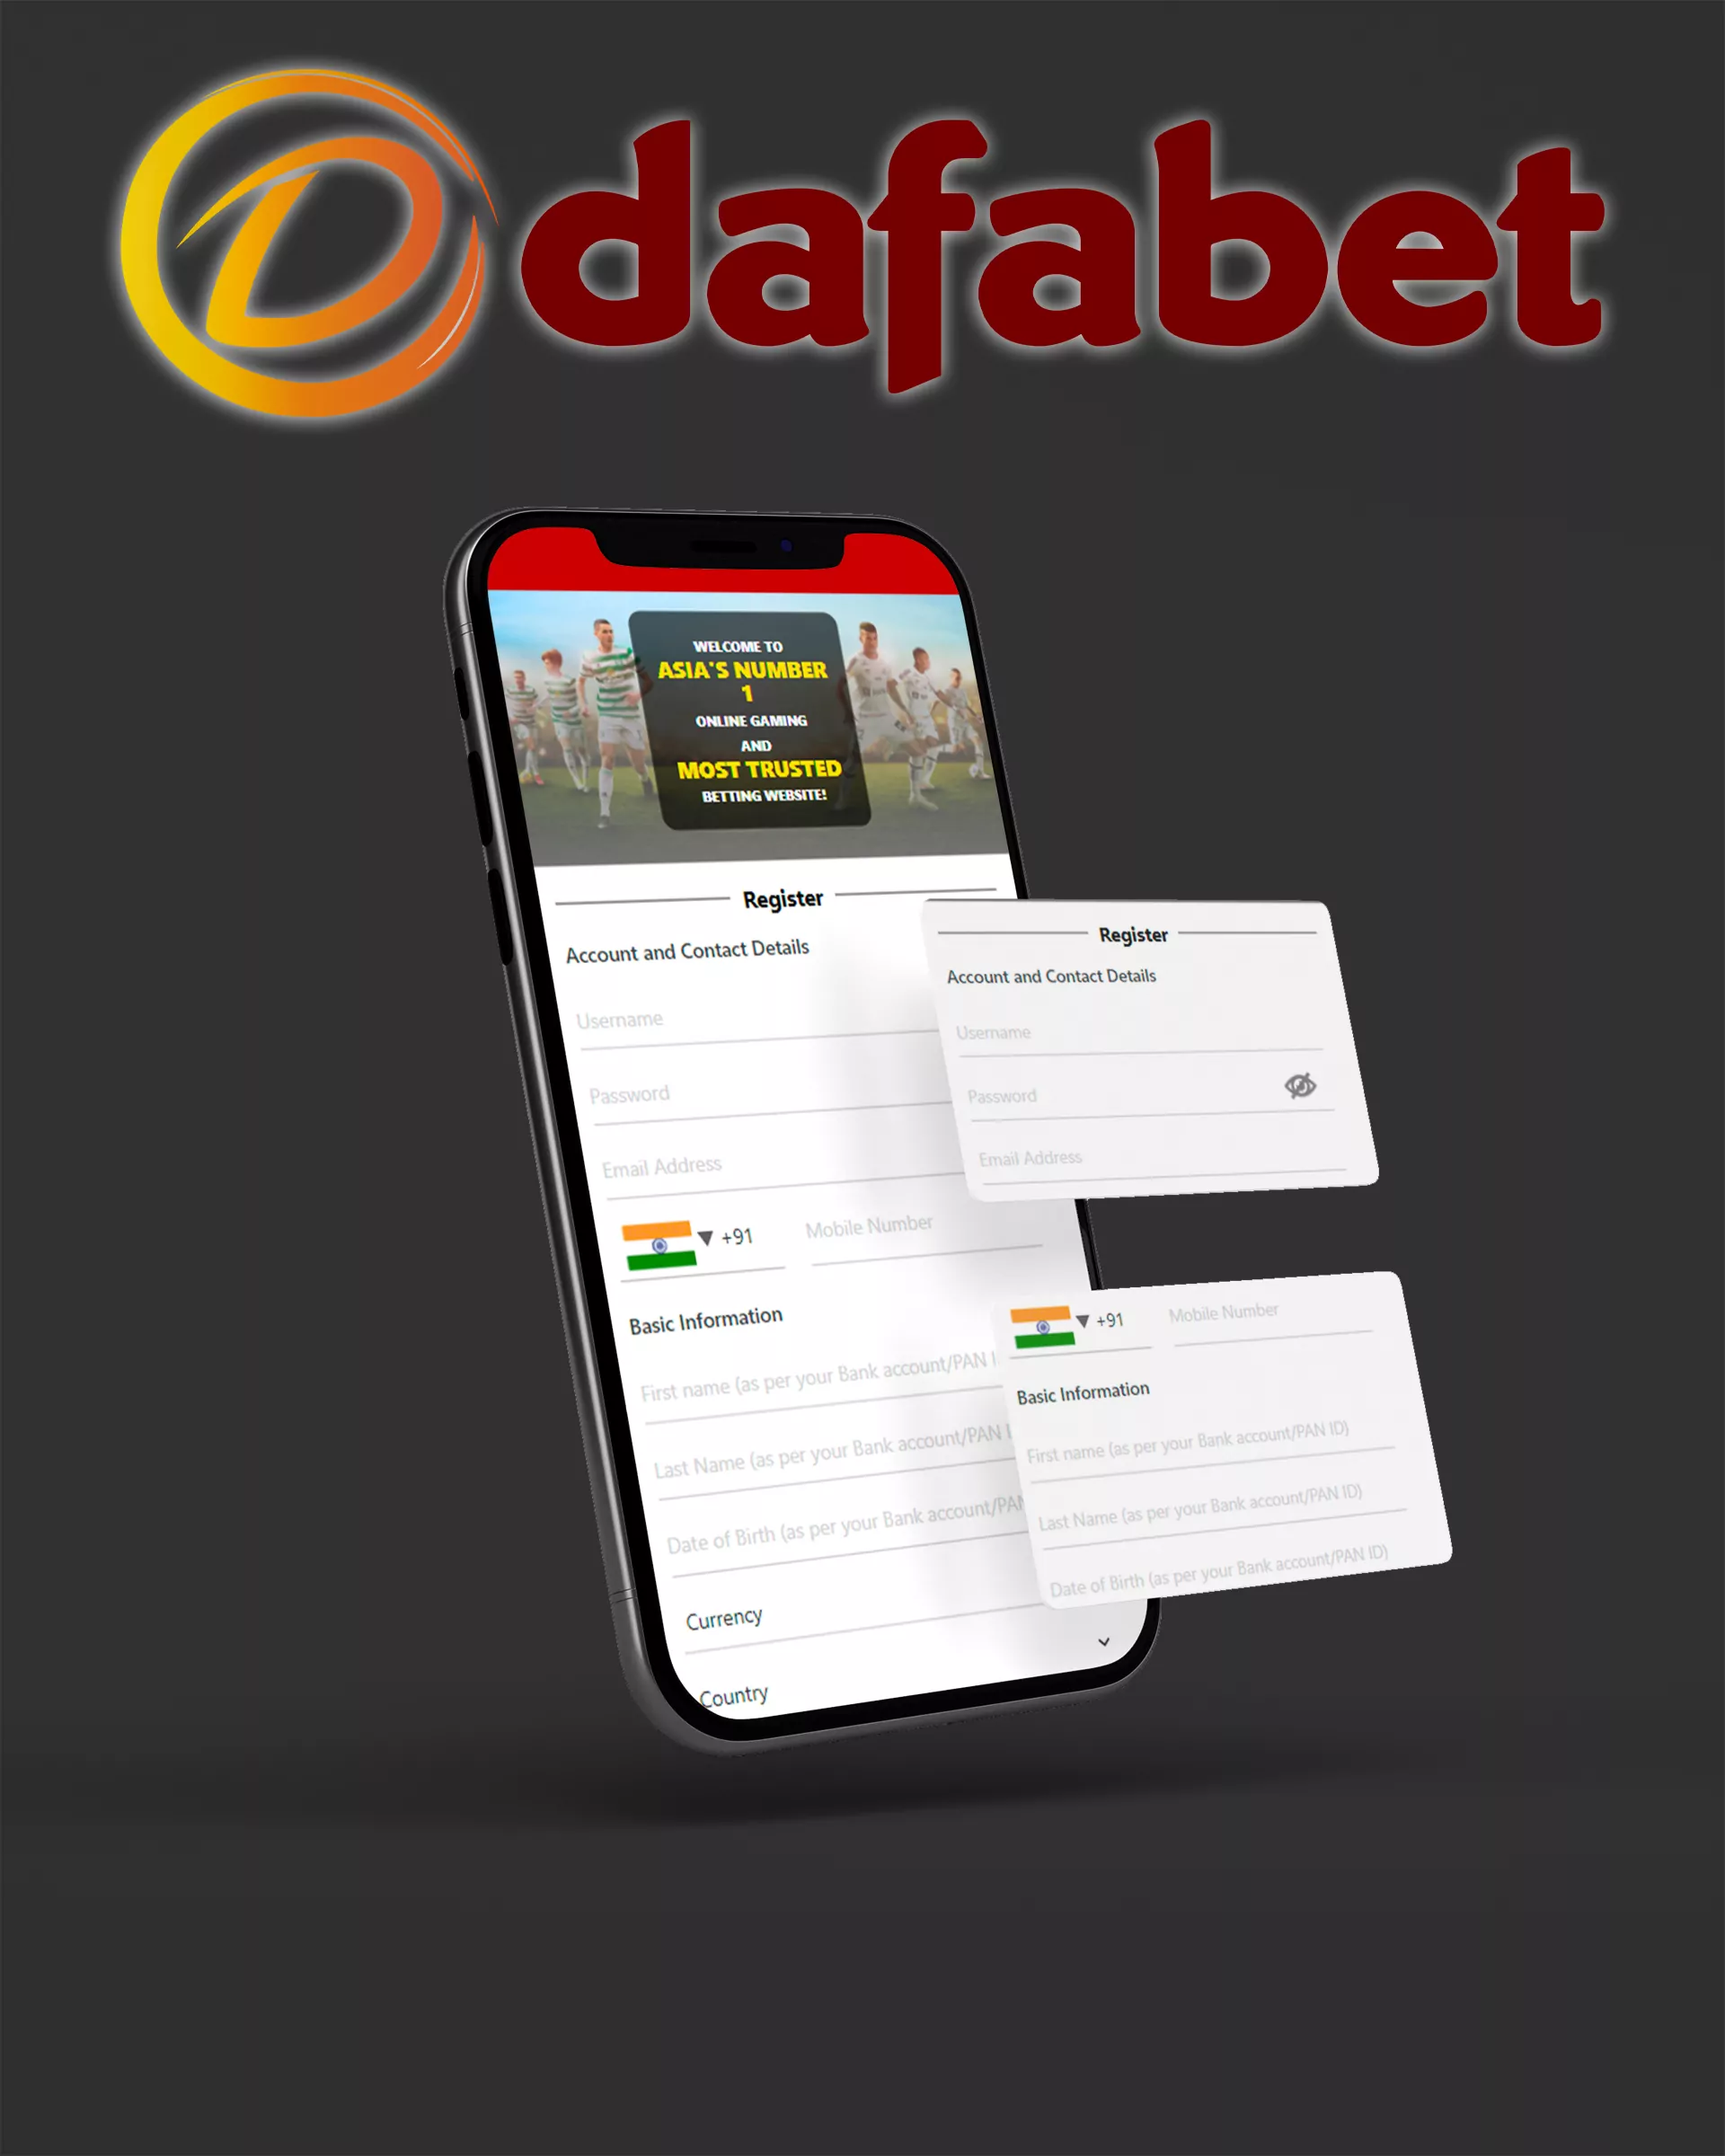 You can also register in the Dafabet mobile app.